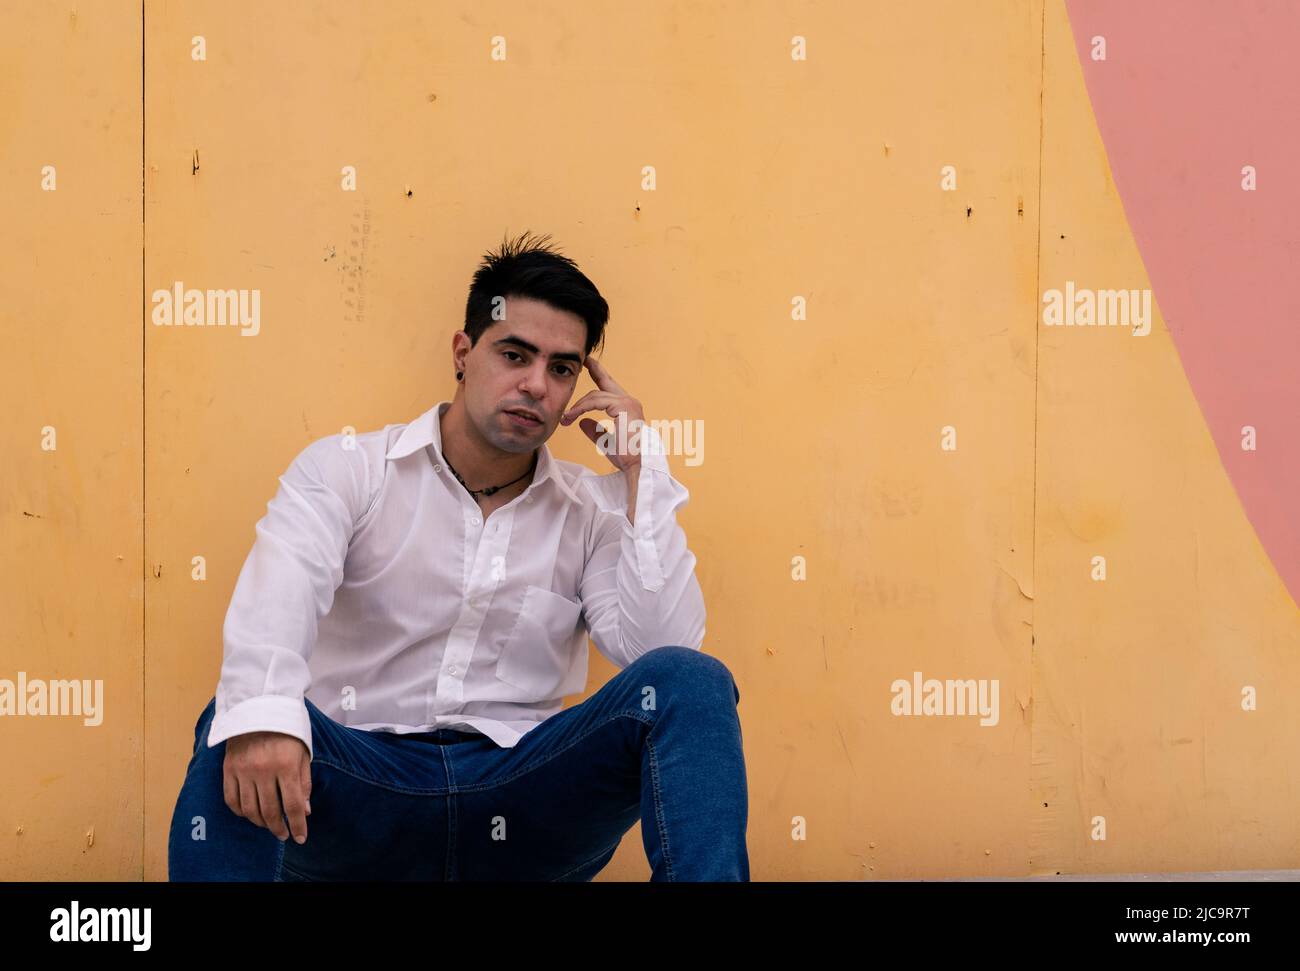 Young latino guy sitting and leaning against a yellow wall in a pensive attitude. Modern clothing. Stock Photo